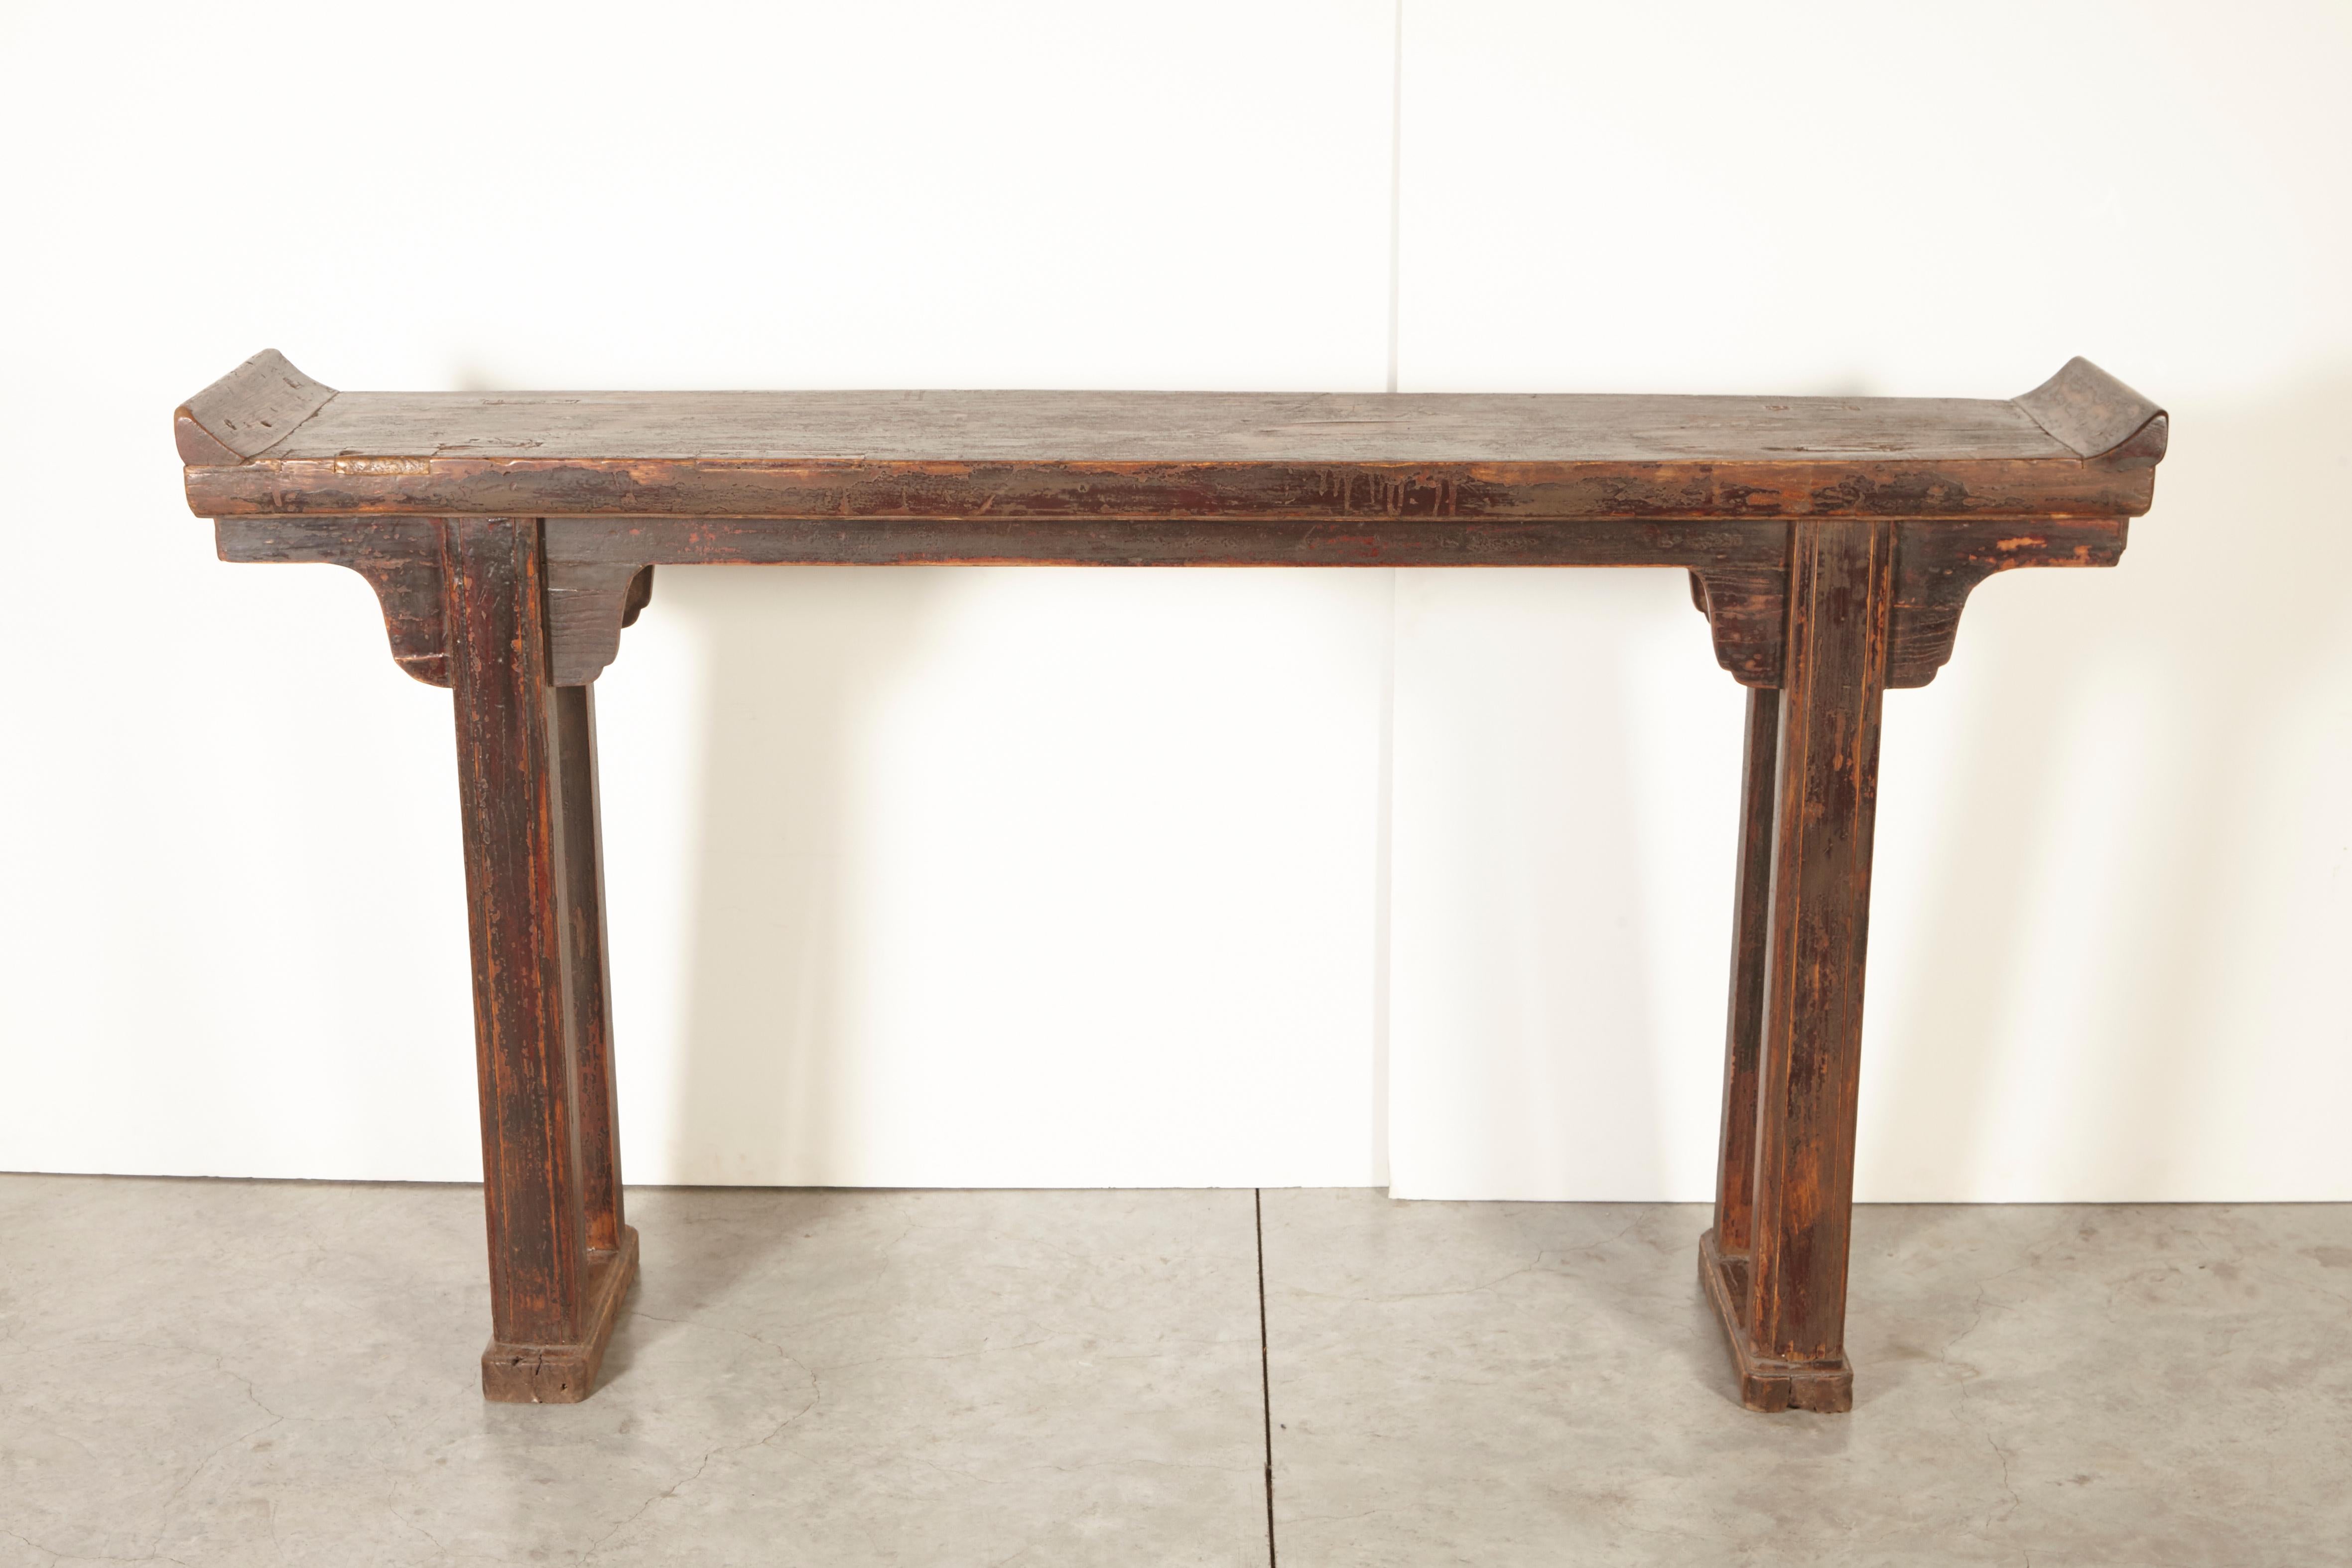 A classically designed 19th century Chinese elm altar table with clean lines and a beautiful patina that display it’s many years of use. It’s narrow profile makes it very useful as an entryway piece or behind a sofa. From Shanxi Province.